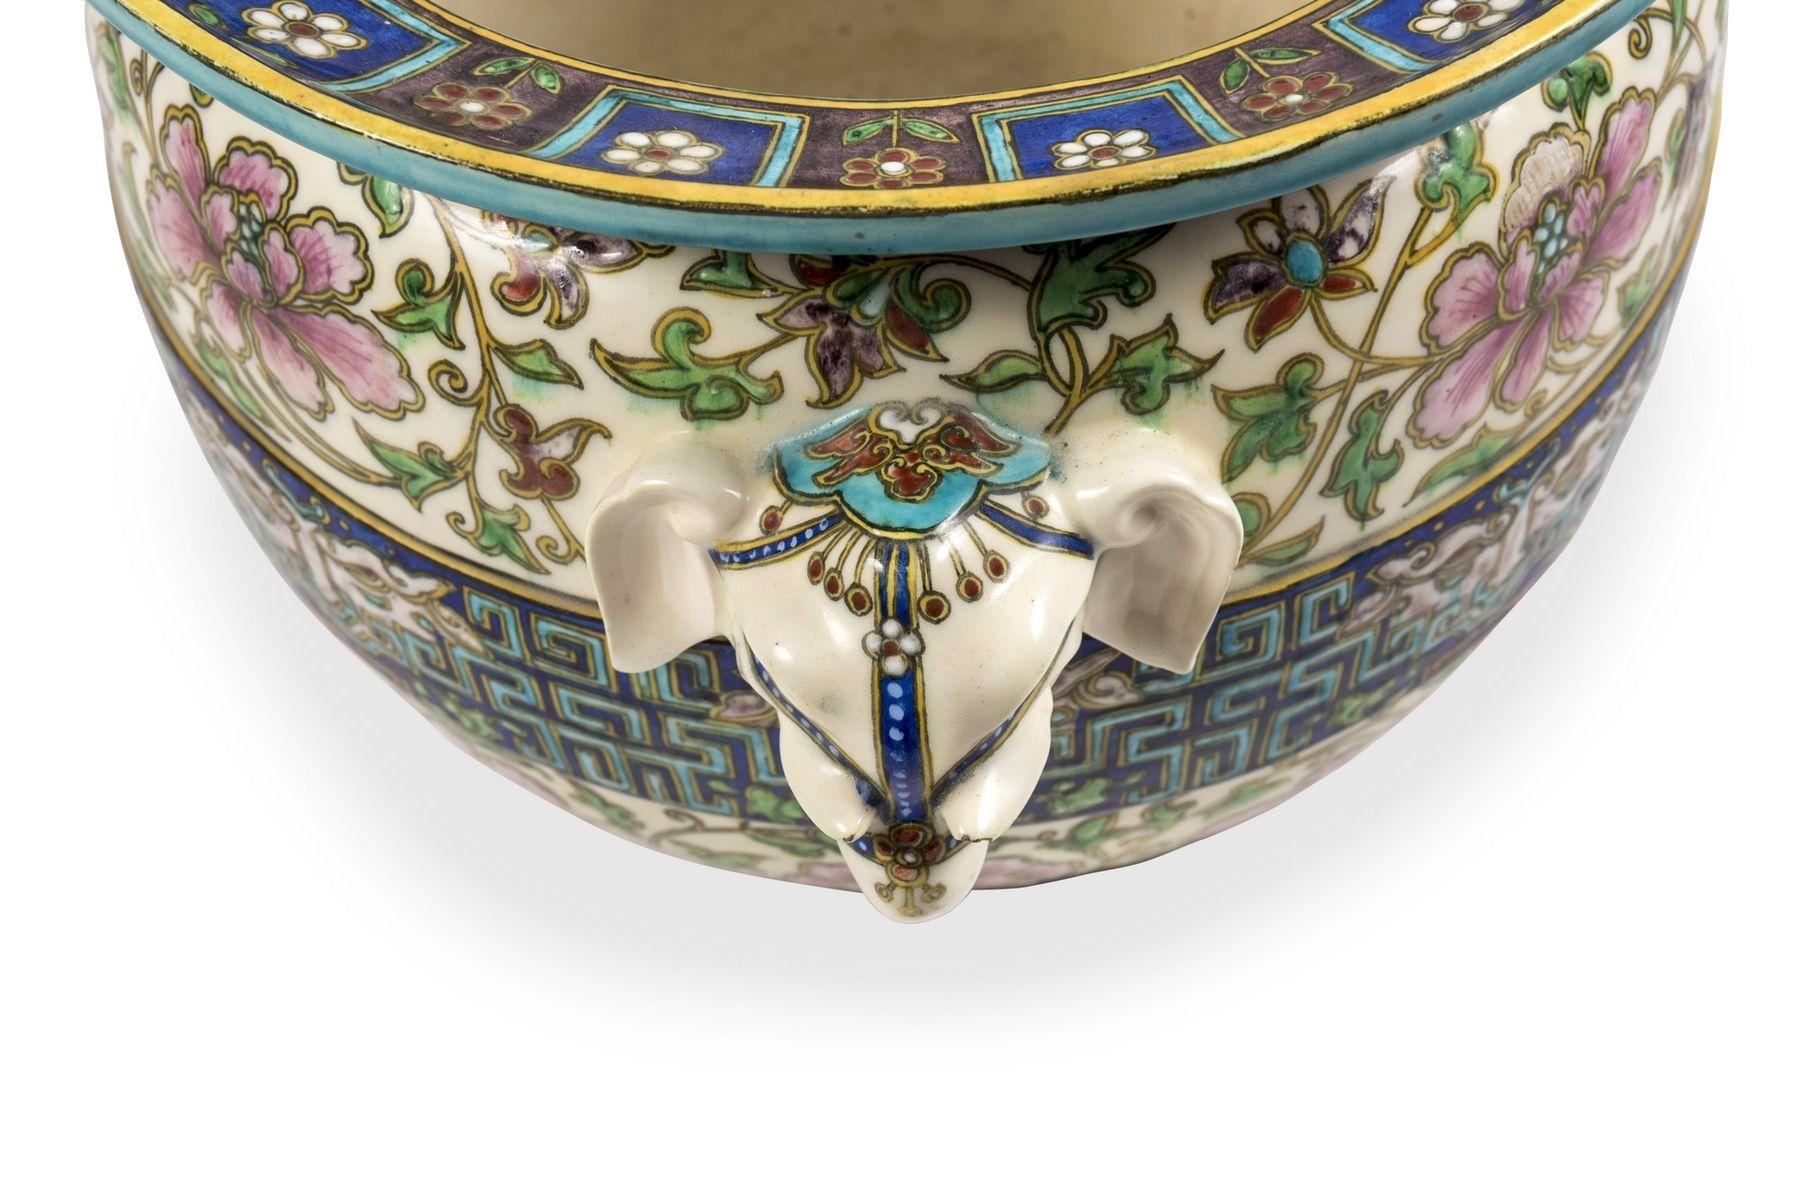 Chinoiserie Planter with elephant handles by Théodore Deck, circa 1870 For Sale